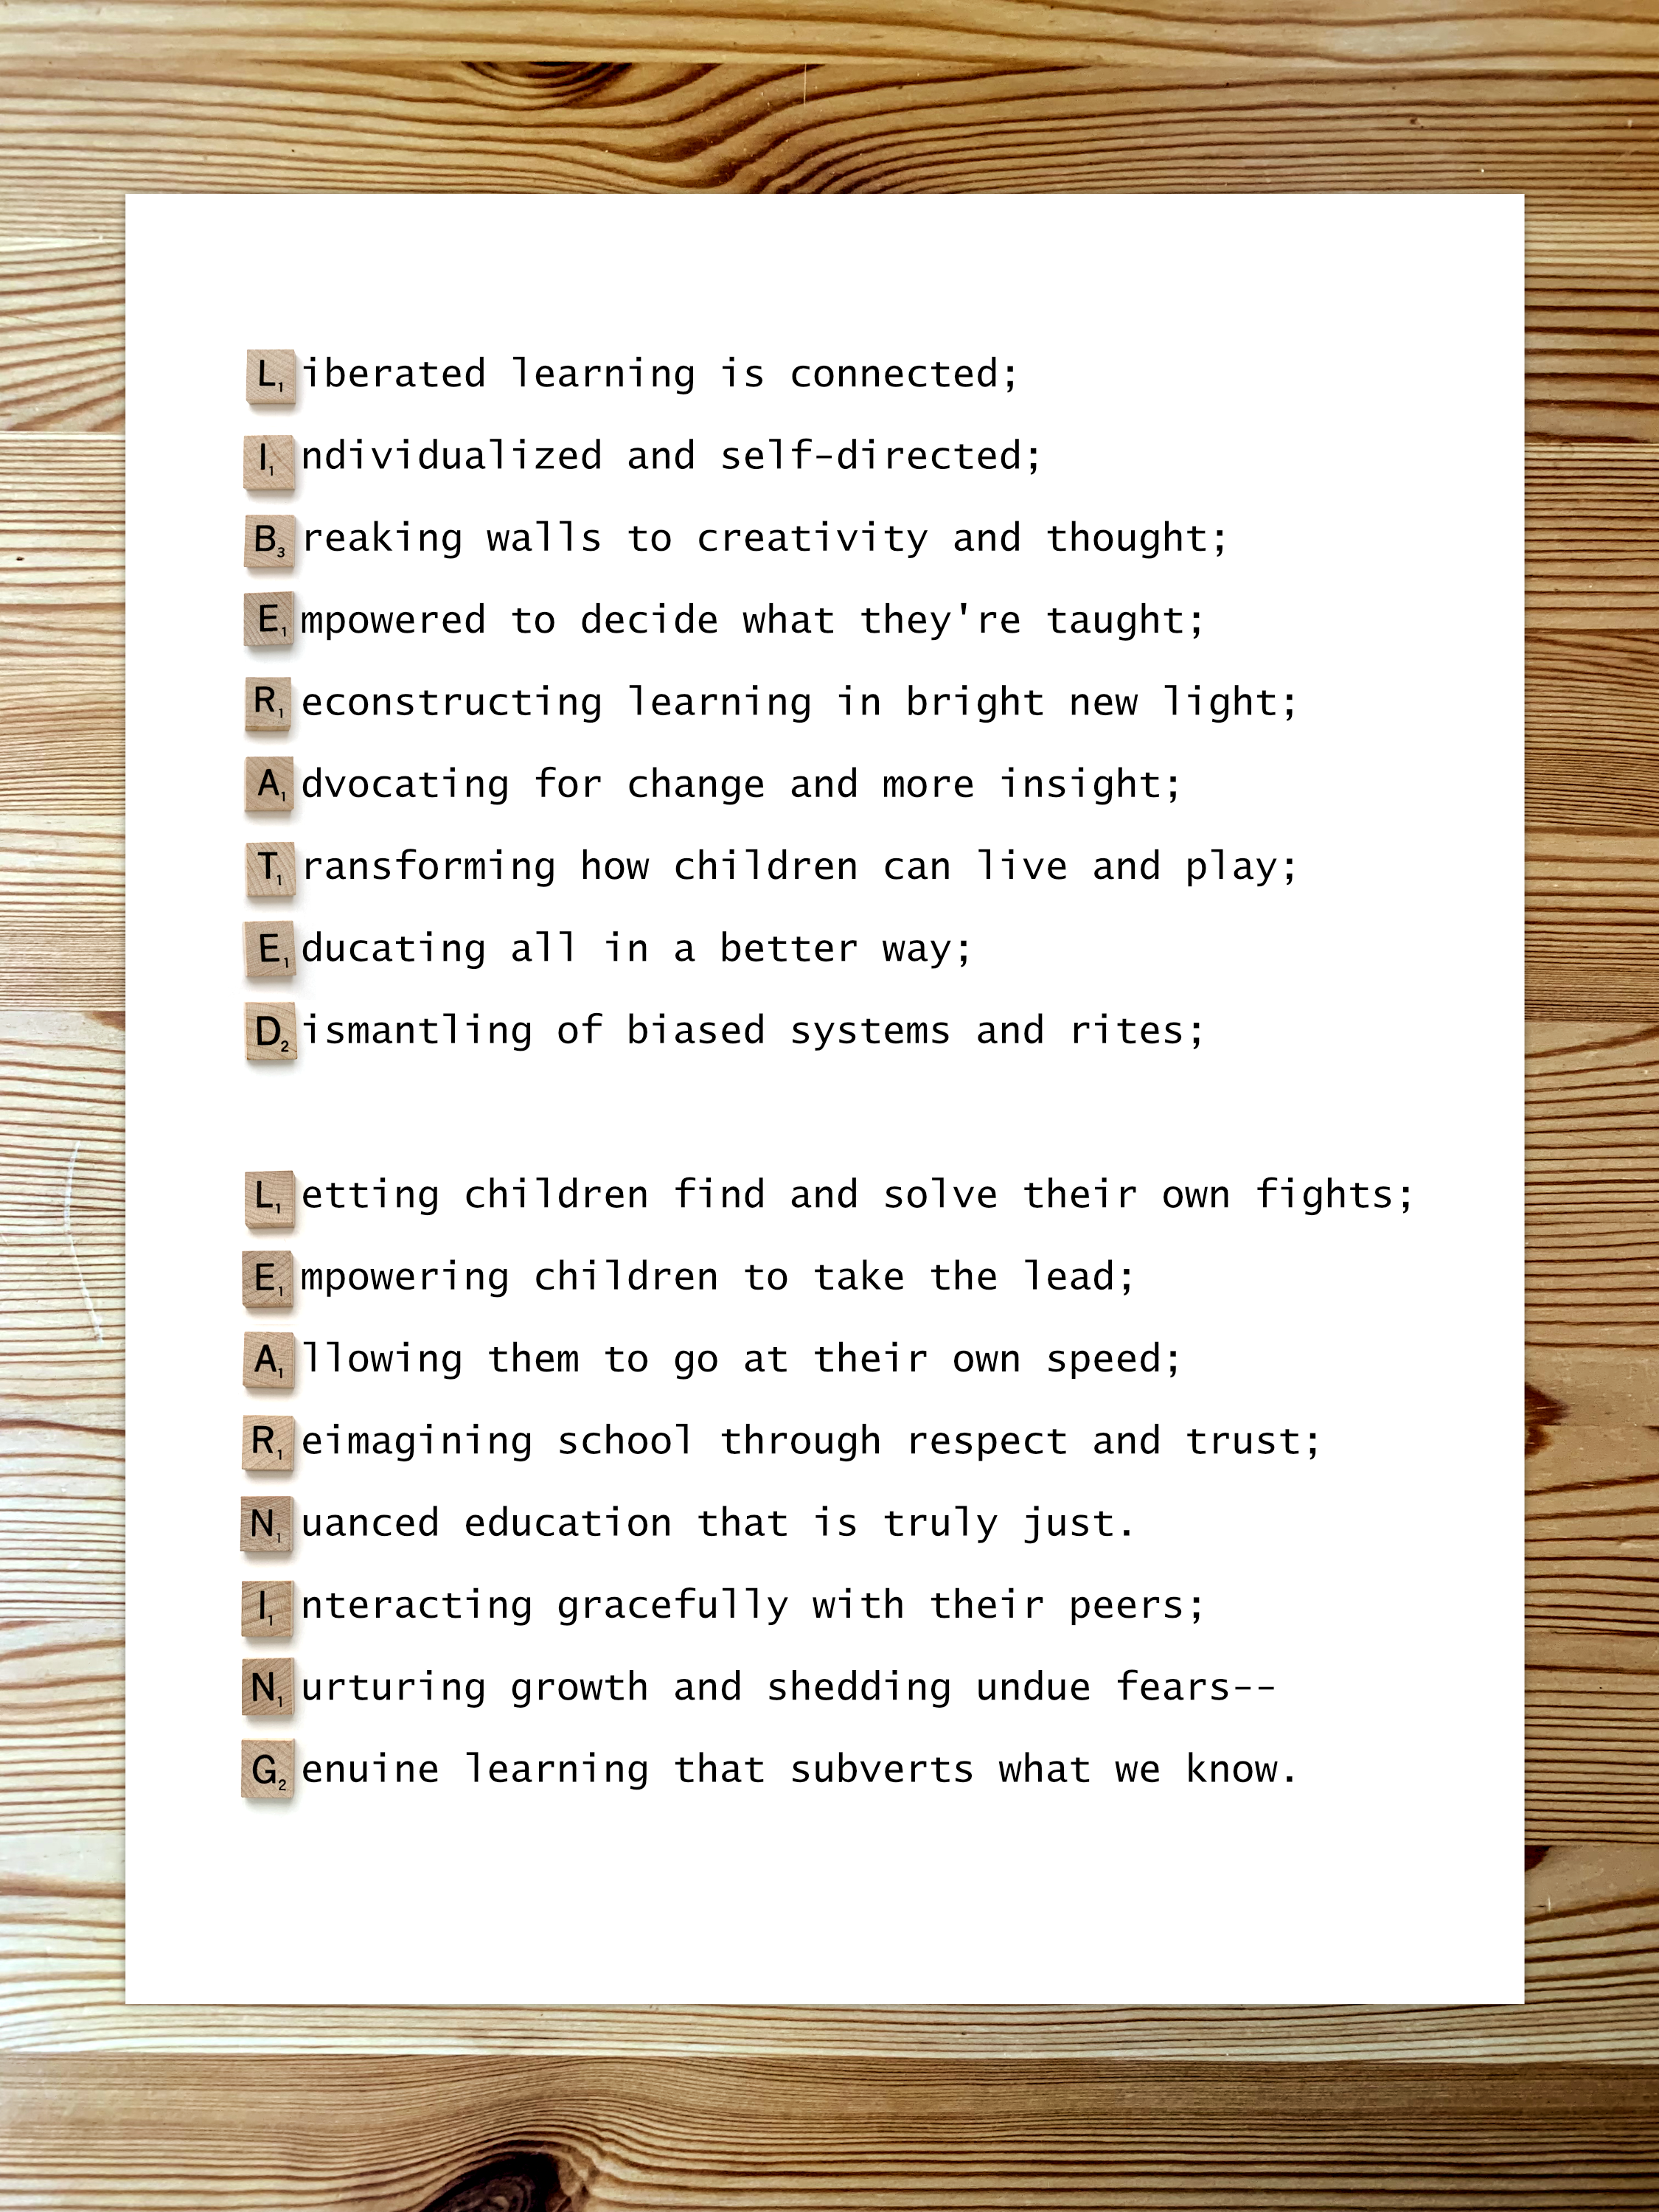 An acrostic poem of Liberated Learning: Liberated learning is connected; Individualized and self-directed; Breaking walls to creativity and thought; Empowered to decide what they're taught; Reconstructing learning in bright new light; Advocating for change and more insight; Transforming how children can live and play; Educating all in a better way; Dismantling of biased systems and rites; Letting children find and solve their own fights; Empowering children to take the lead; Allowing them to go at their own speed; Reimagining school through respect and trust; Nuanced education that is truly just. Interacting gracefully with their peers; Nurturing growth and shedding undue fears-- Genuine learning that subverts what we know.